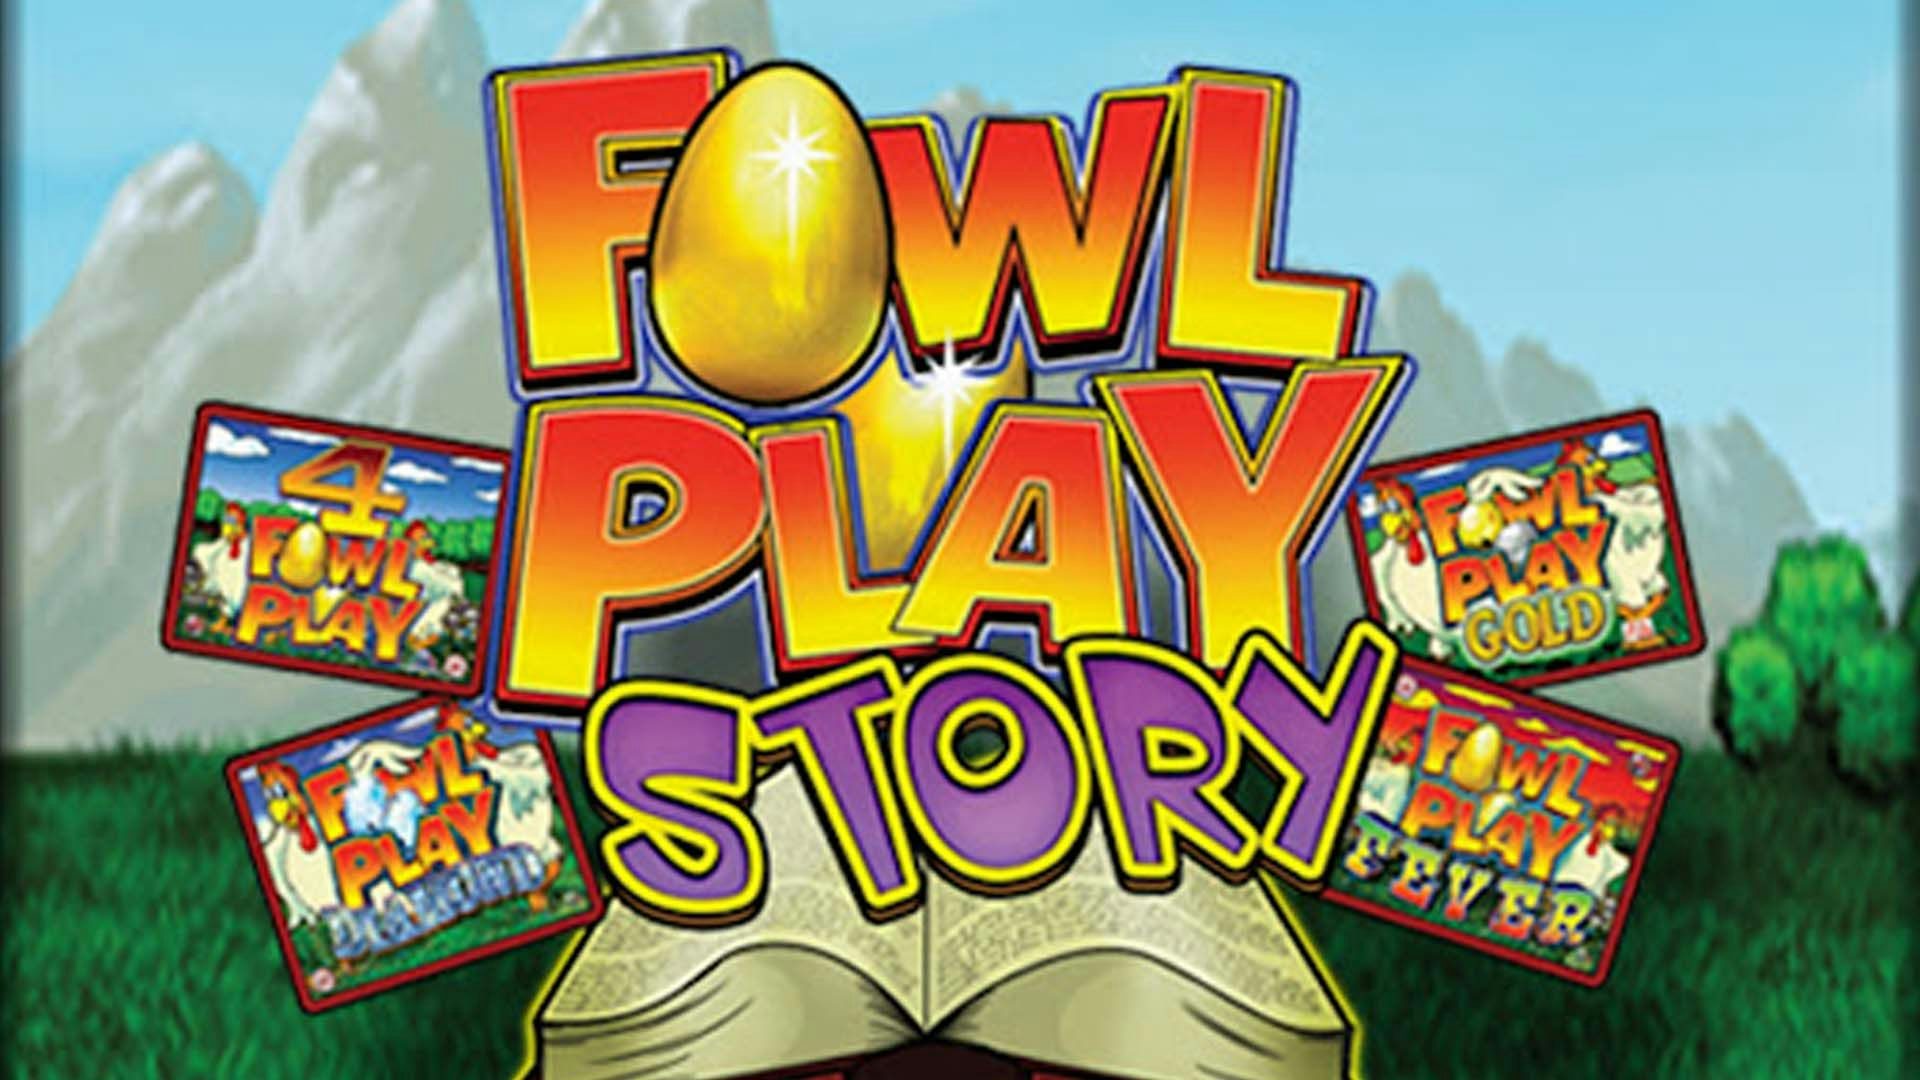 Fowl Play Story